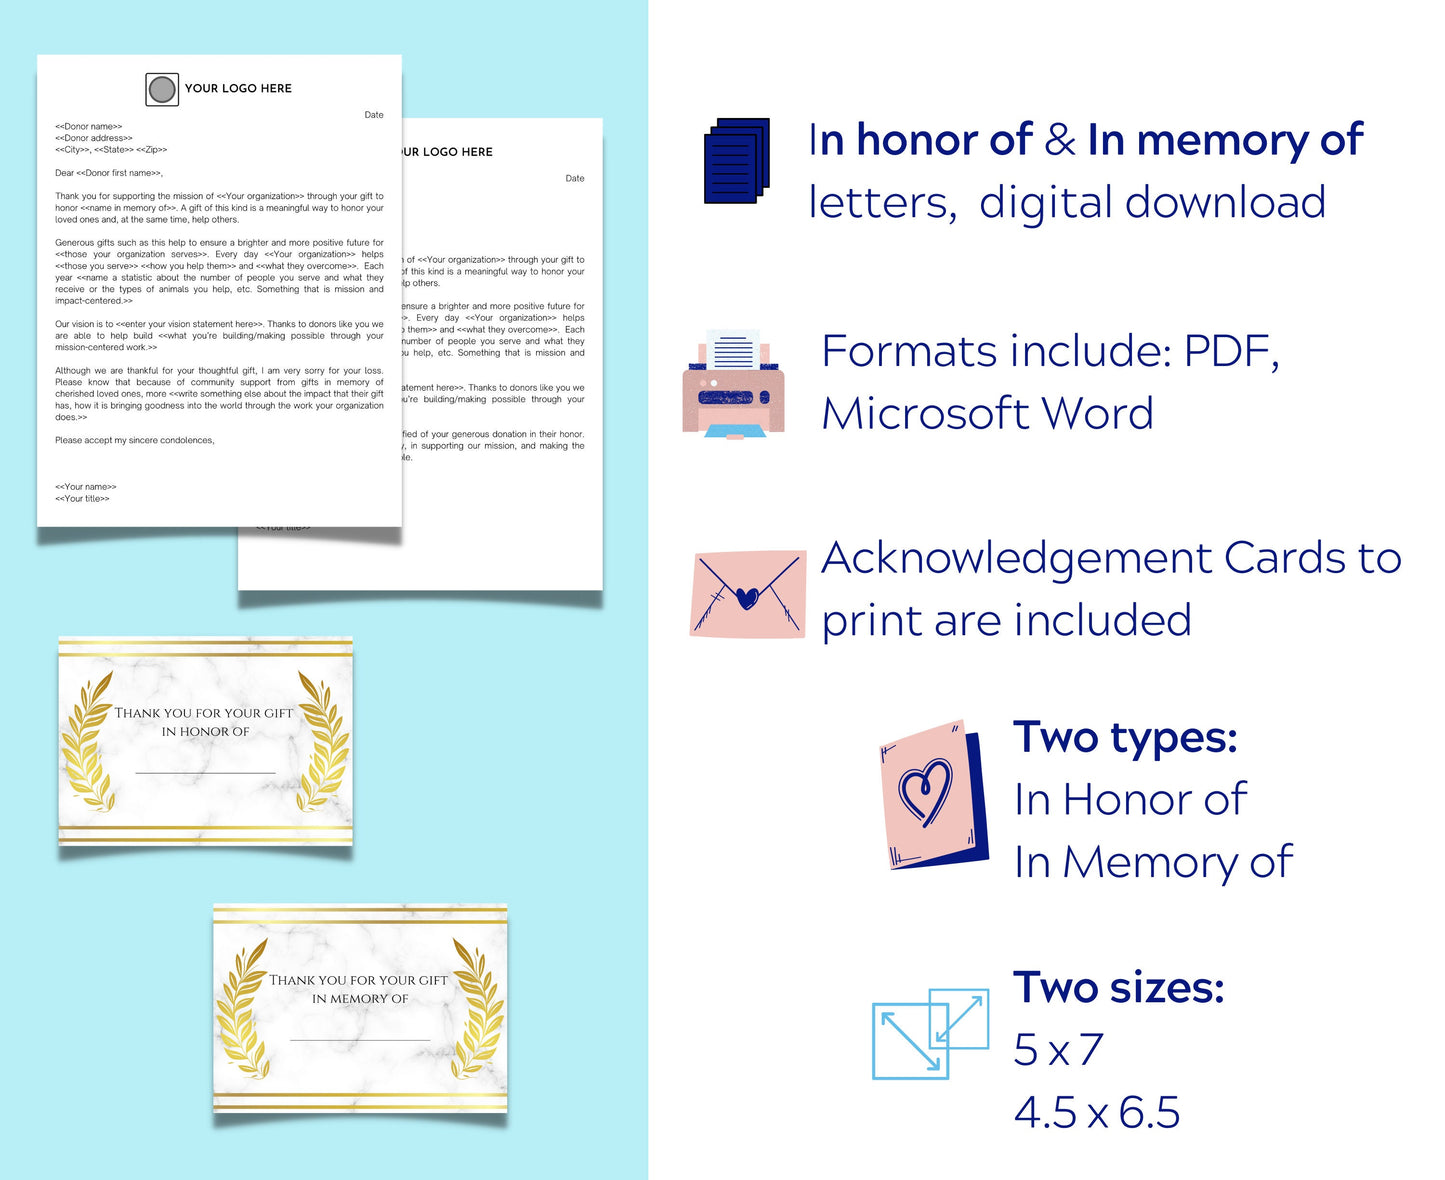 Tribute Gift Thank You Letters | In Memory of | In Honor of